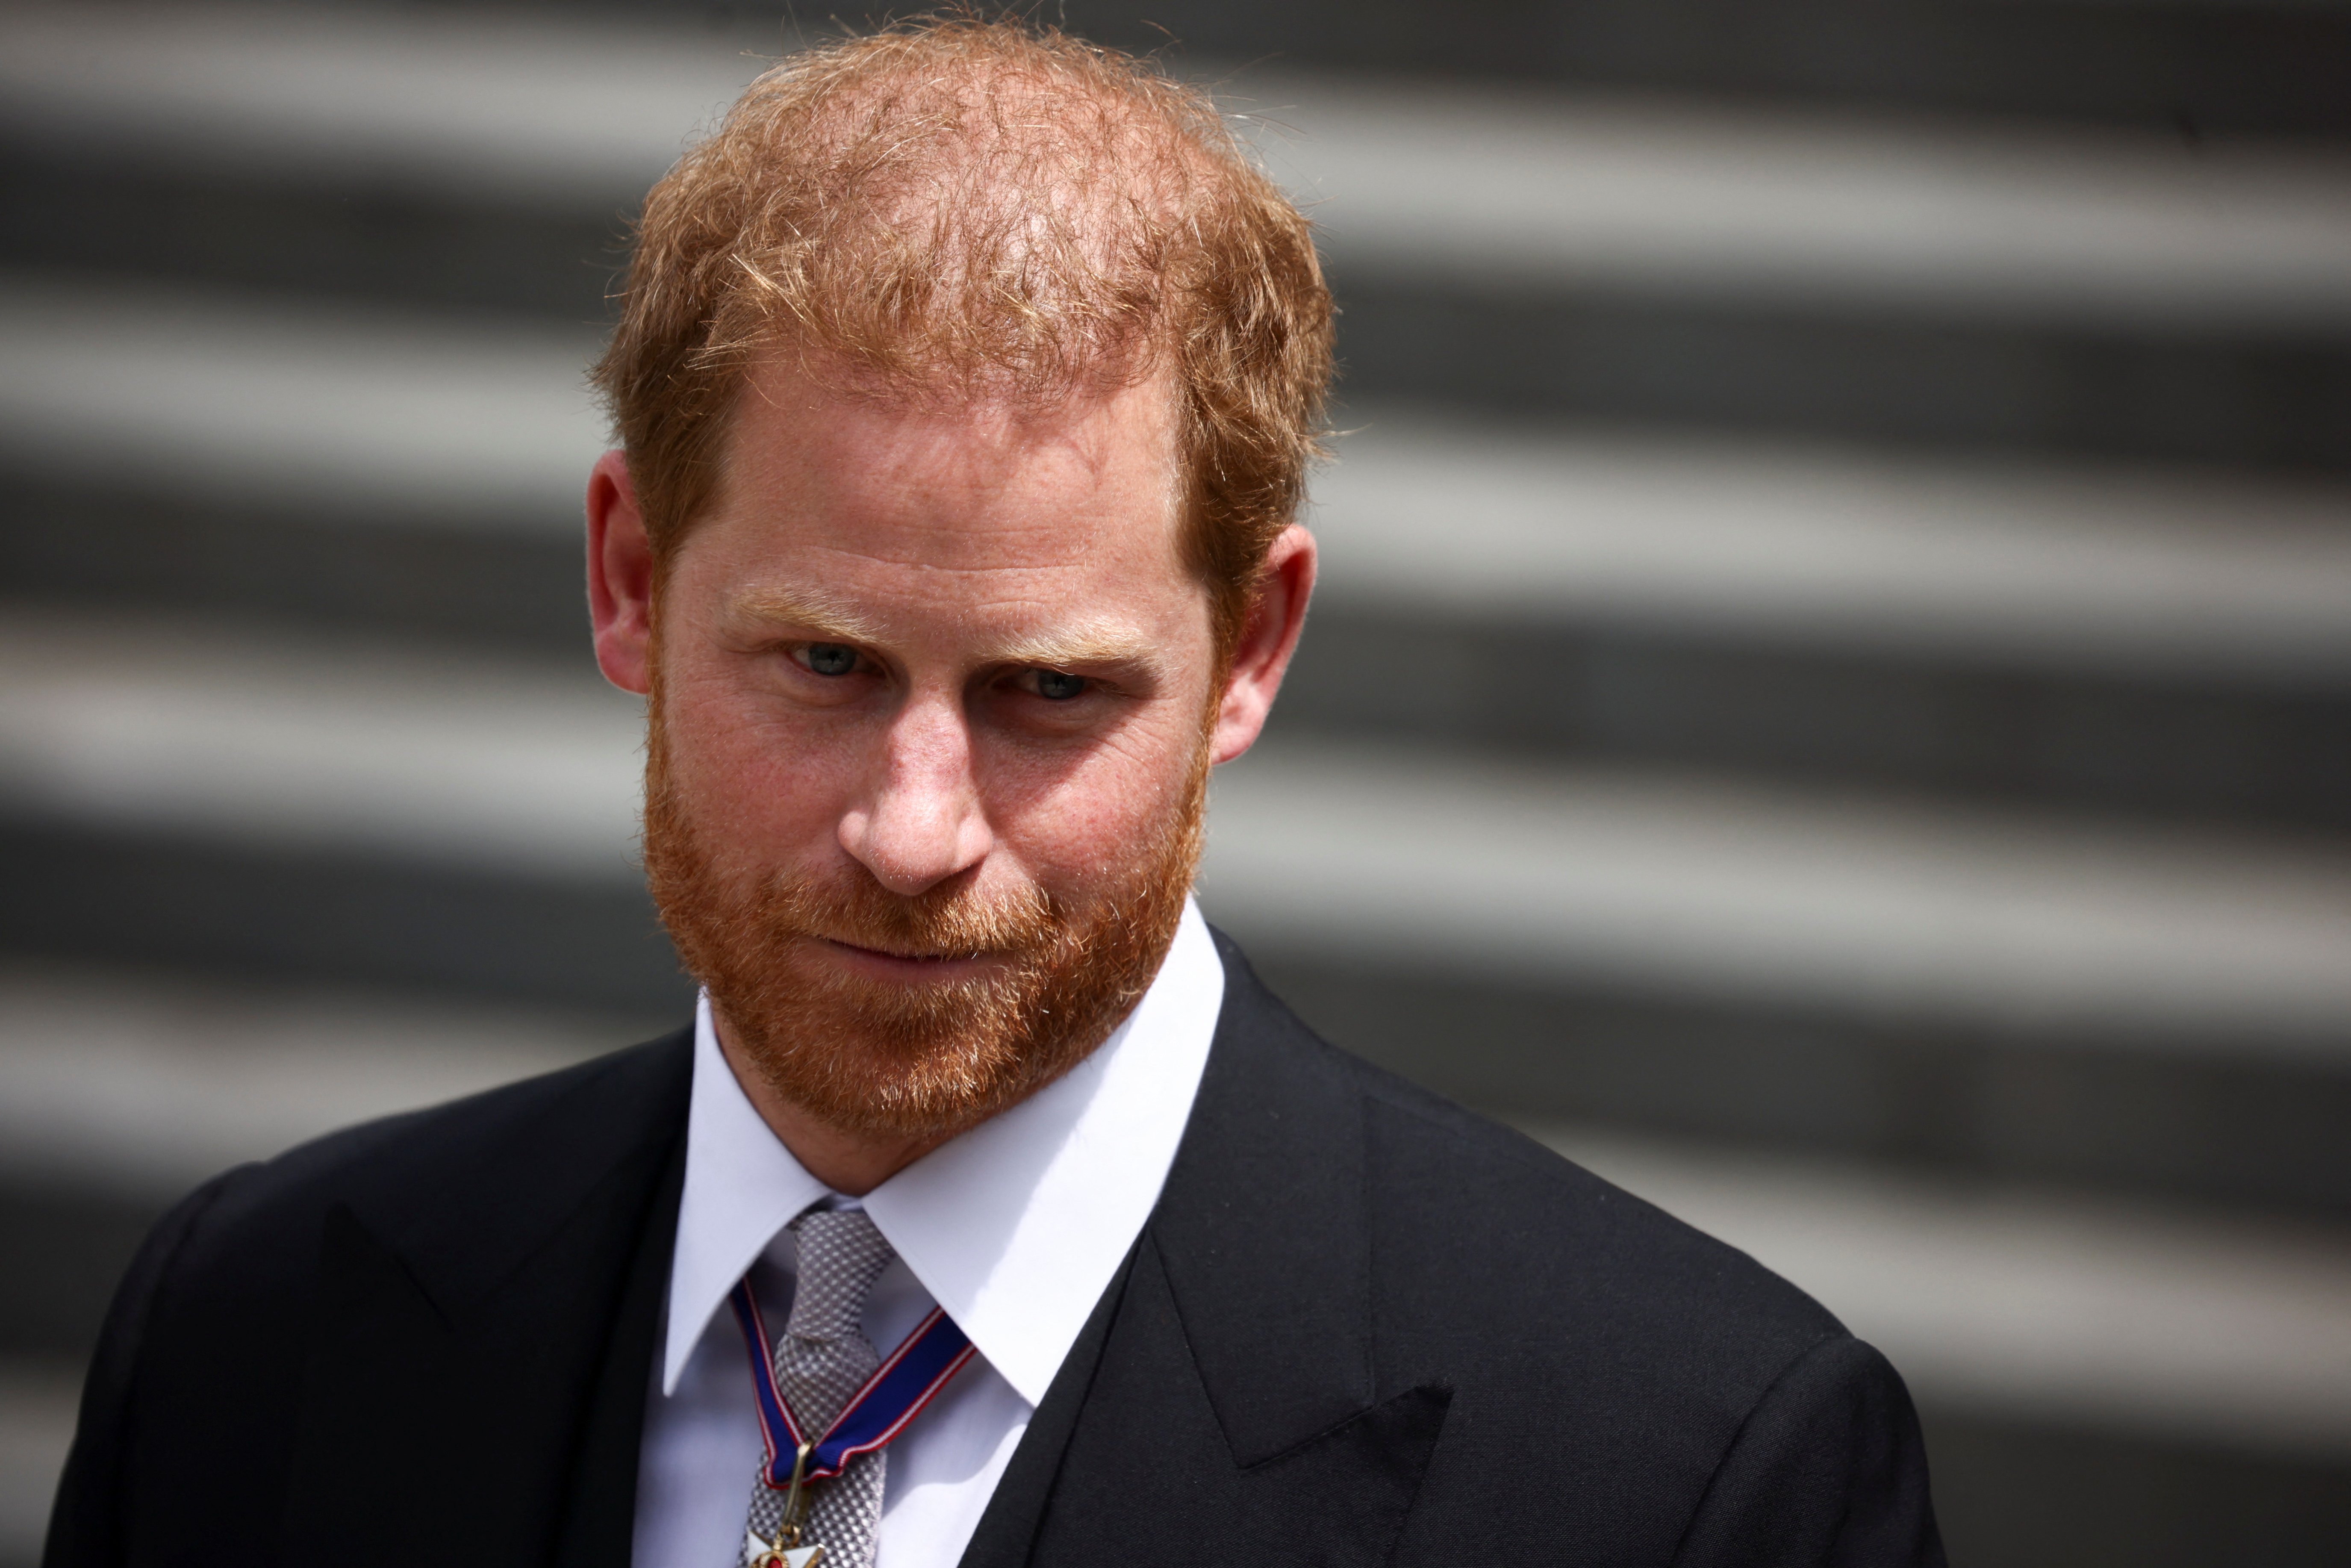 Prince Harry, Duke of Sussex at St Paul's Cathedral on June 3, 2022 in London, England. | Source: Getty Images